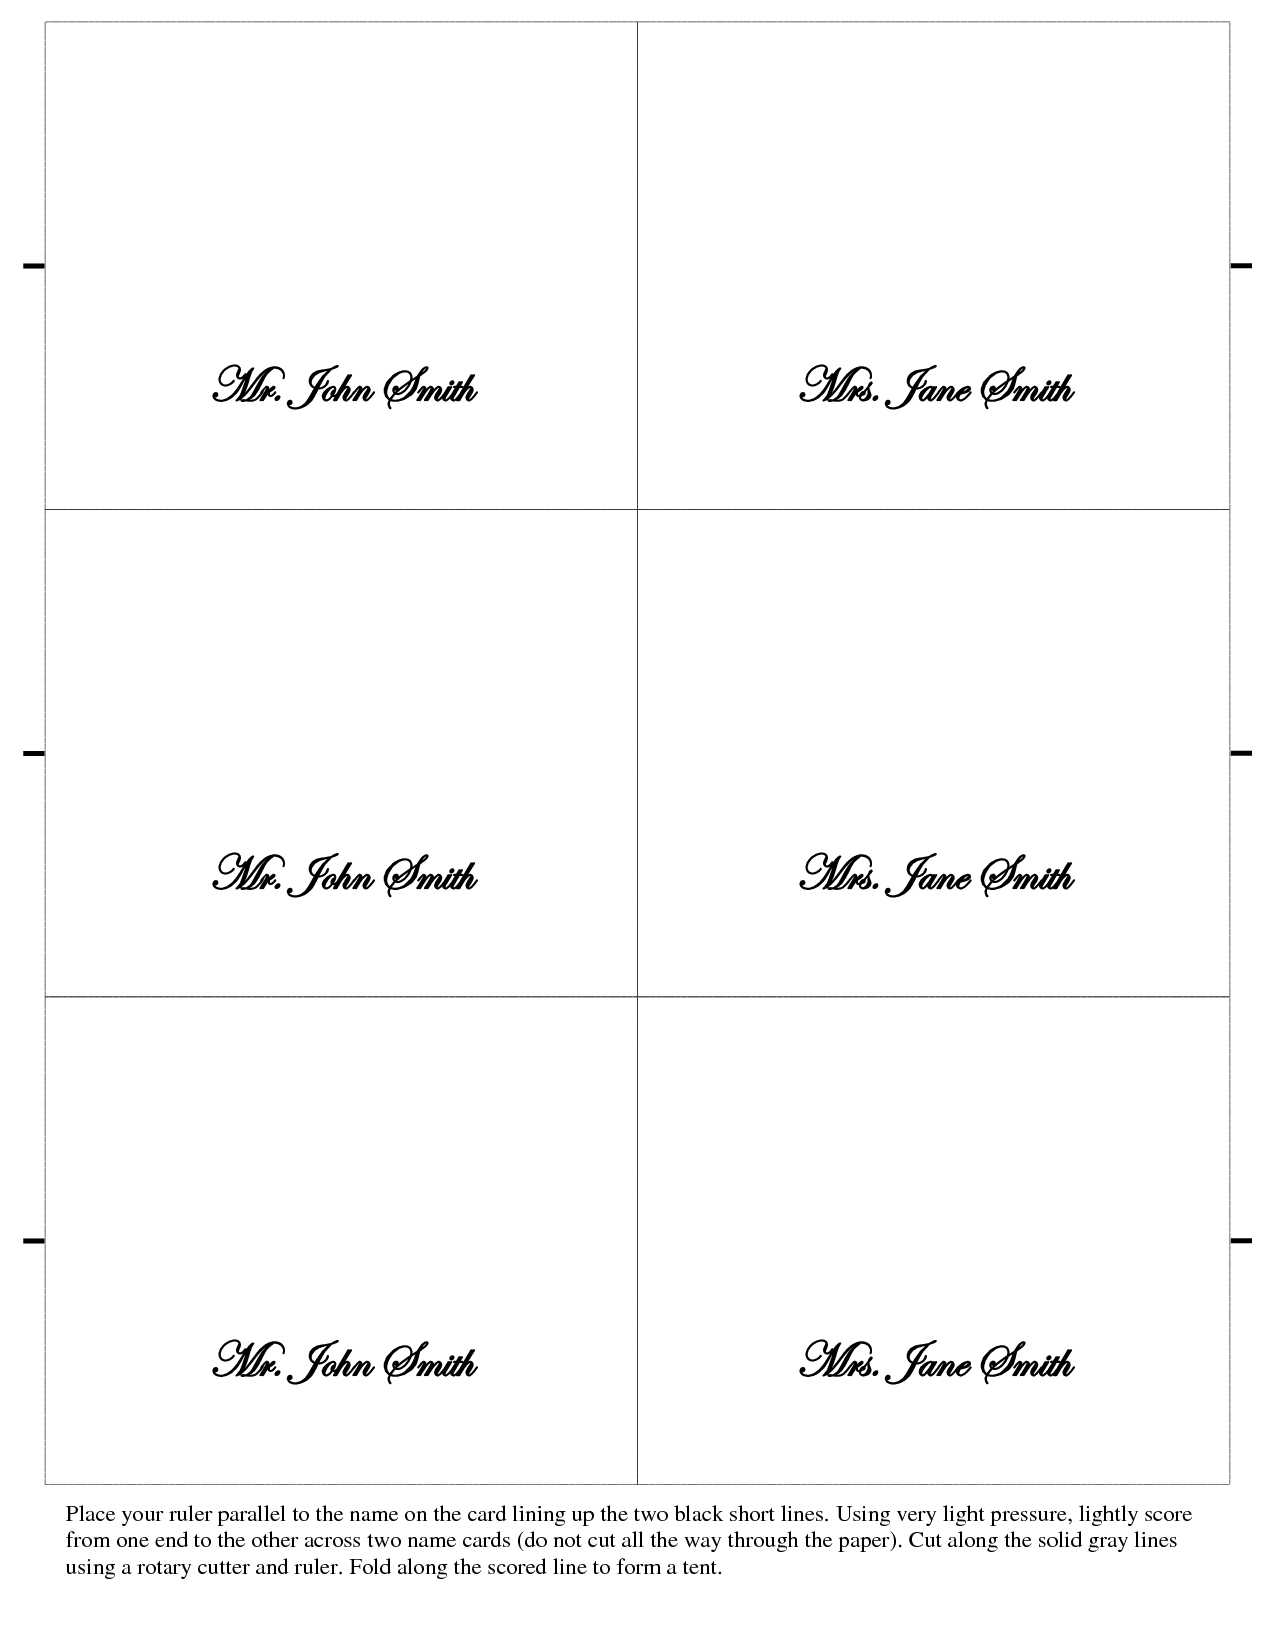 Free Place Card Templates 6 Per Page - Atlantaauctionco With Place Card Template Free 6 Per Page